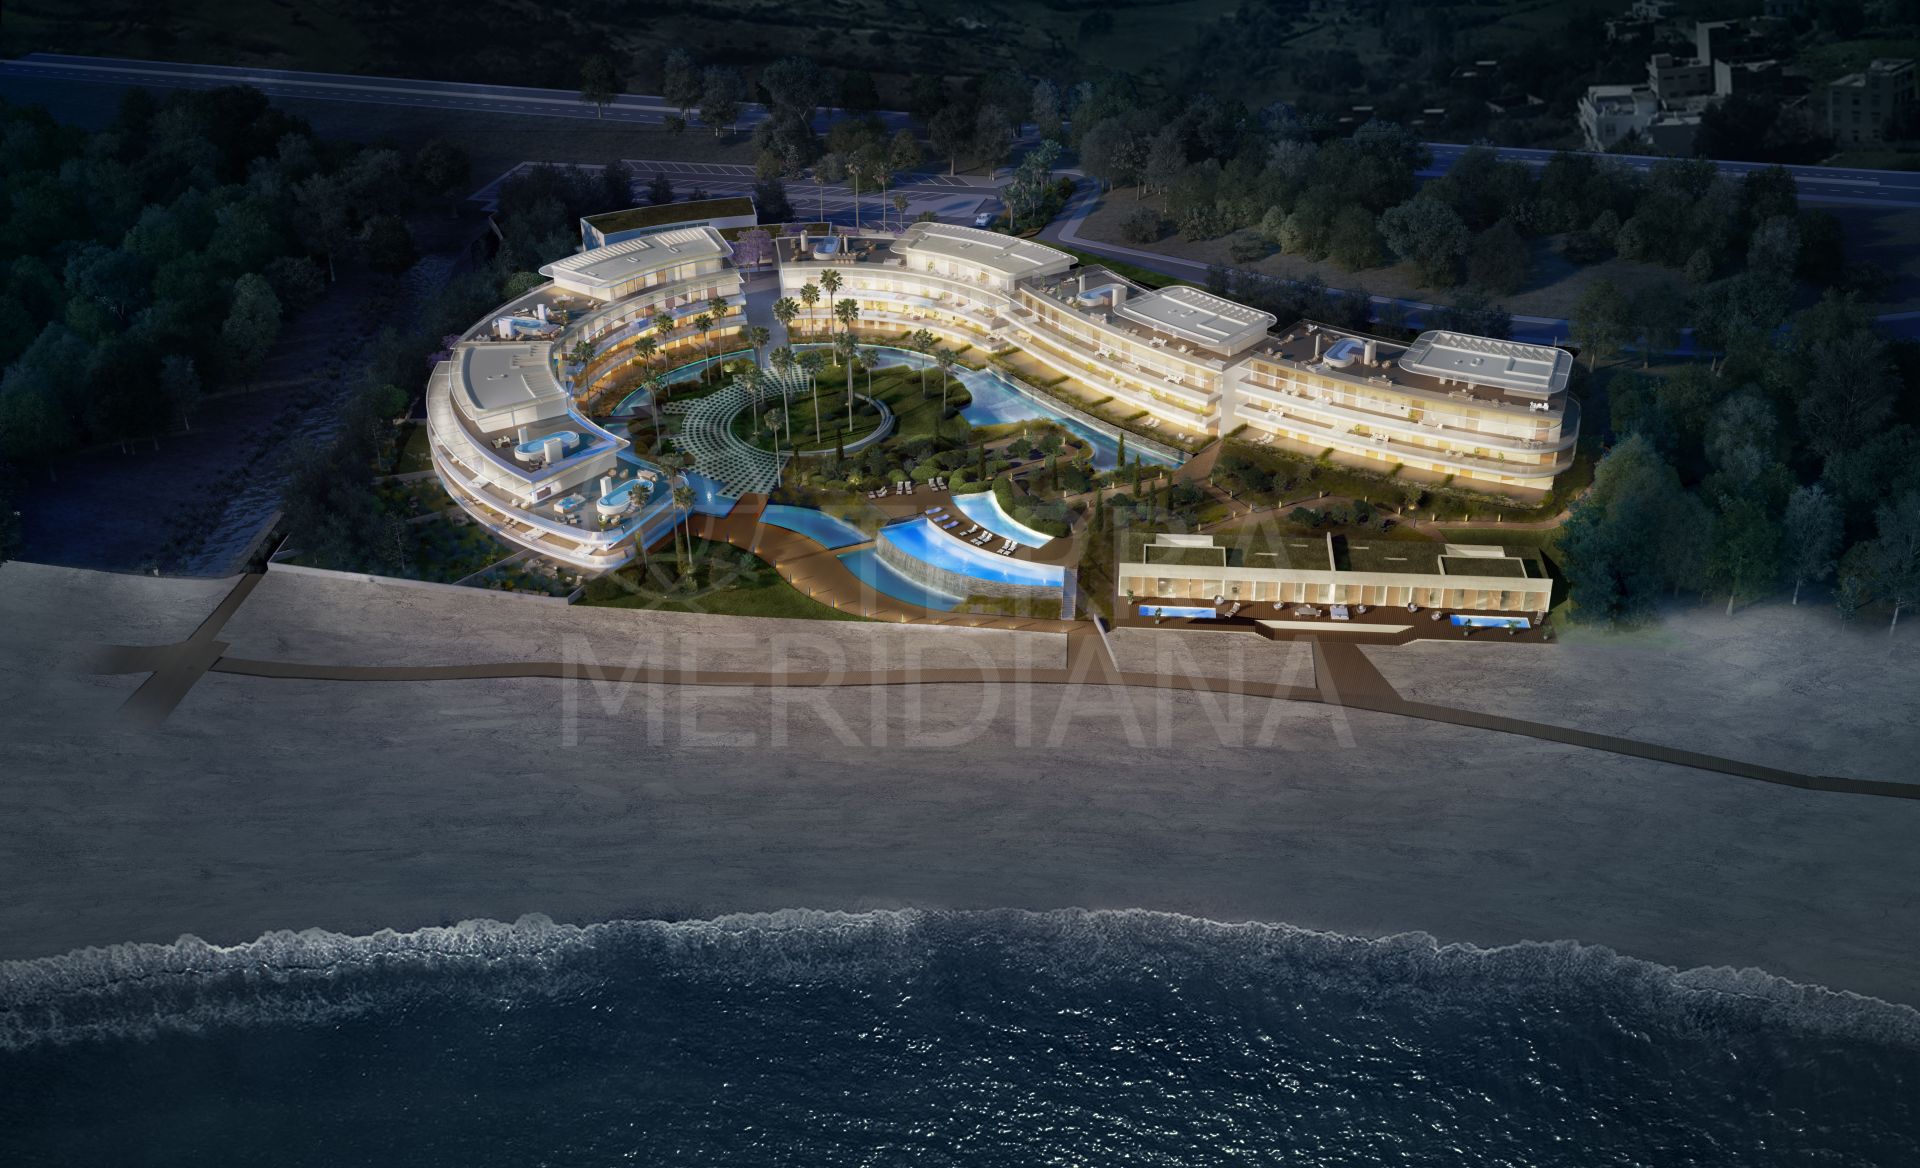 New deluxe contemporary apartments on the beach for sale in The Edge, Estepona